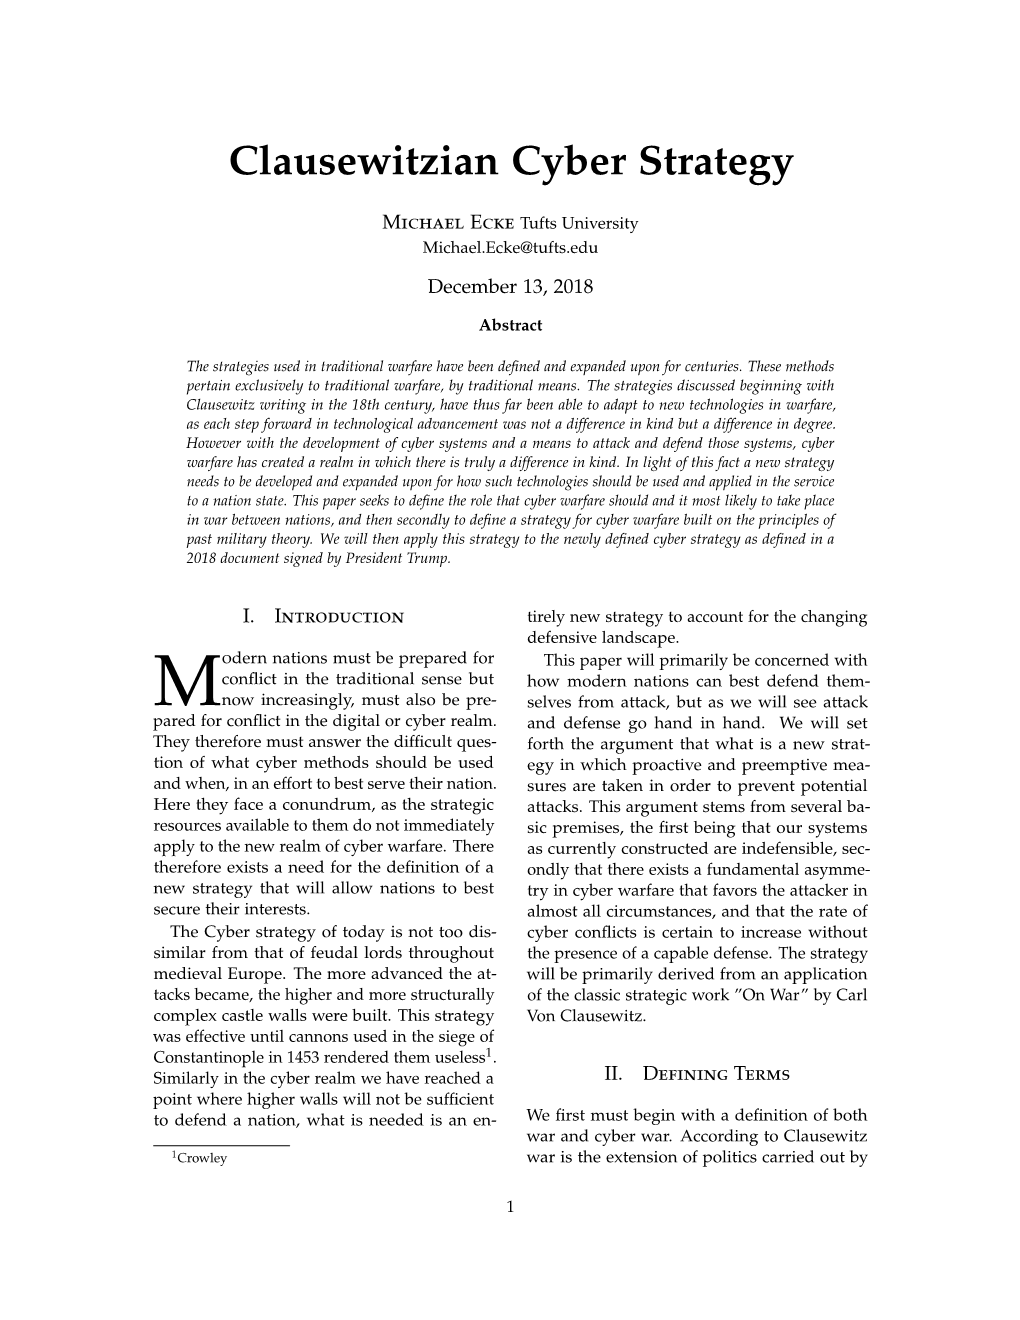 Clausewitzian Cyber Strategy